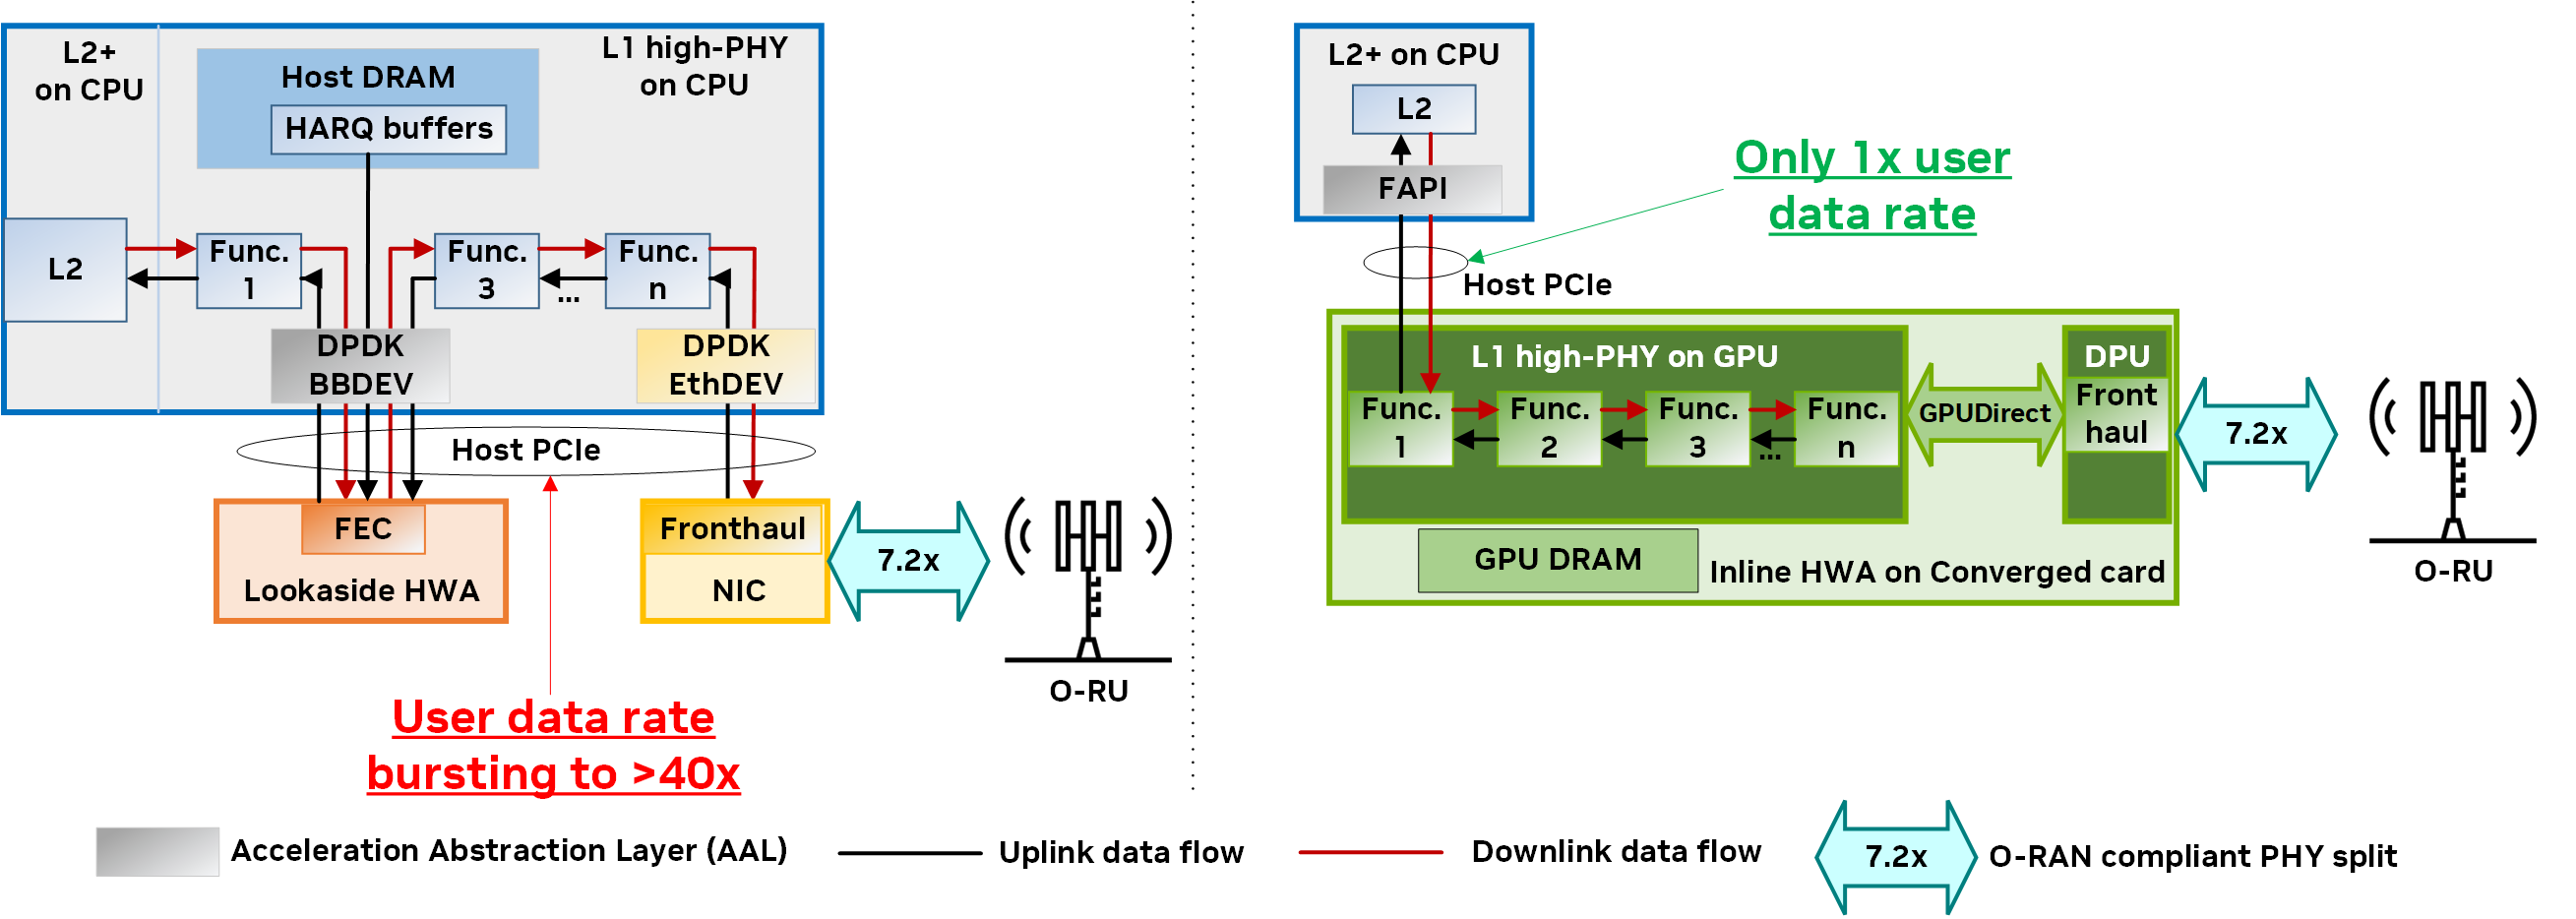 Diagram shows that the programmable inline accelerator (L1 high-PHY offload) delivers 10-40x efficiency in PCIe bandwidth usage compared to the fixed-function lookaside accelerator (FEC offload using DPDK BBDEV).